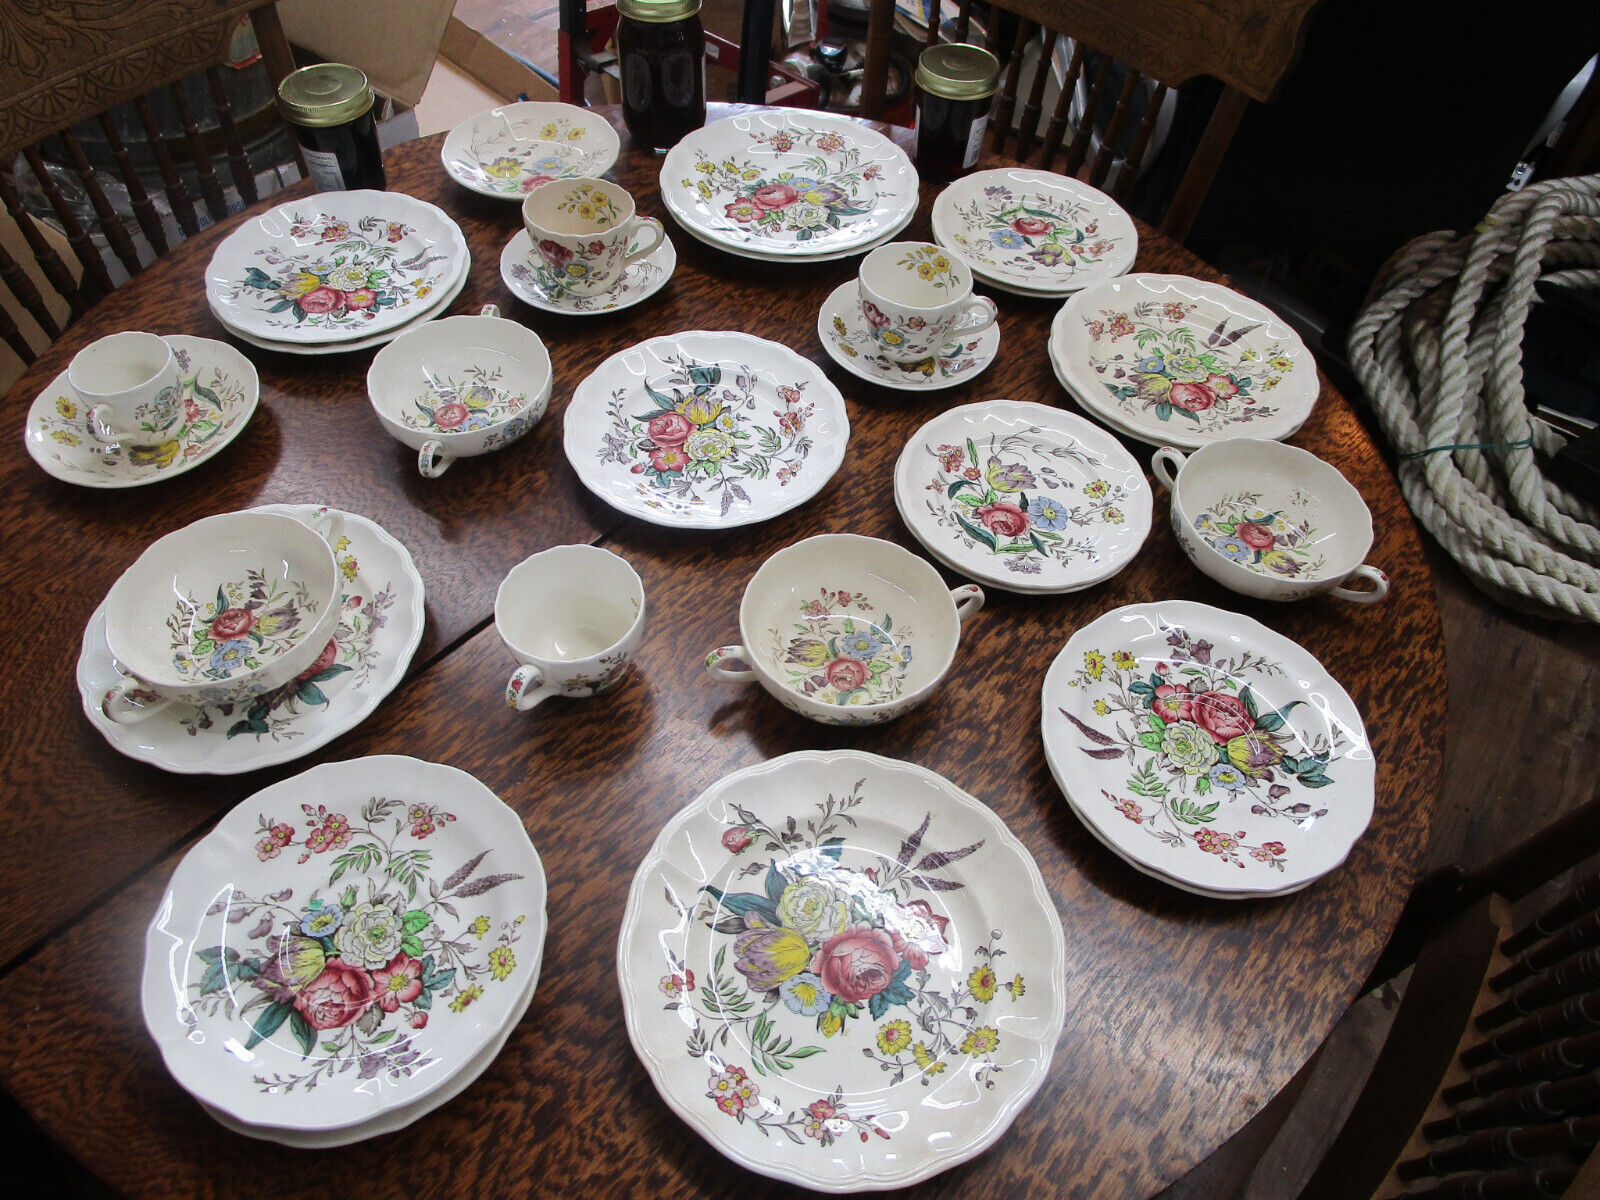 29 Pieces Vintage Copeland Spode China Gainsborough pattern (See Pictures)